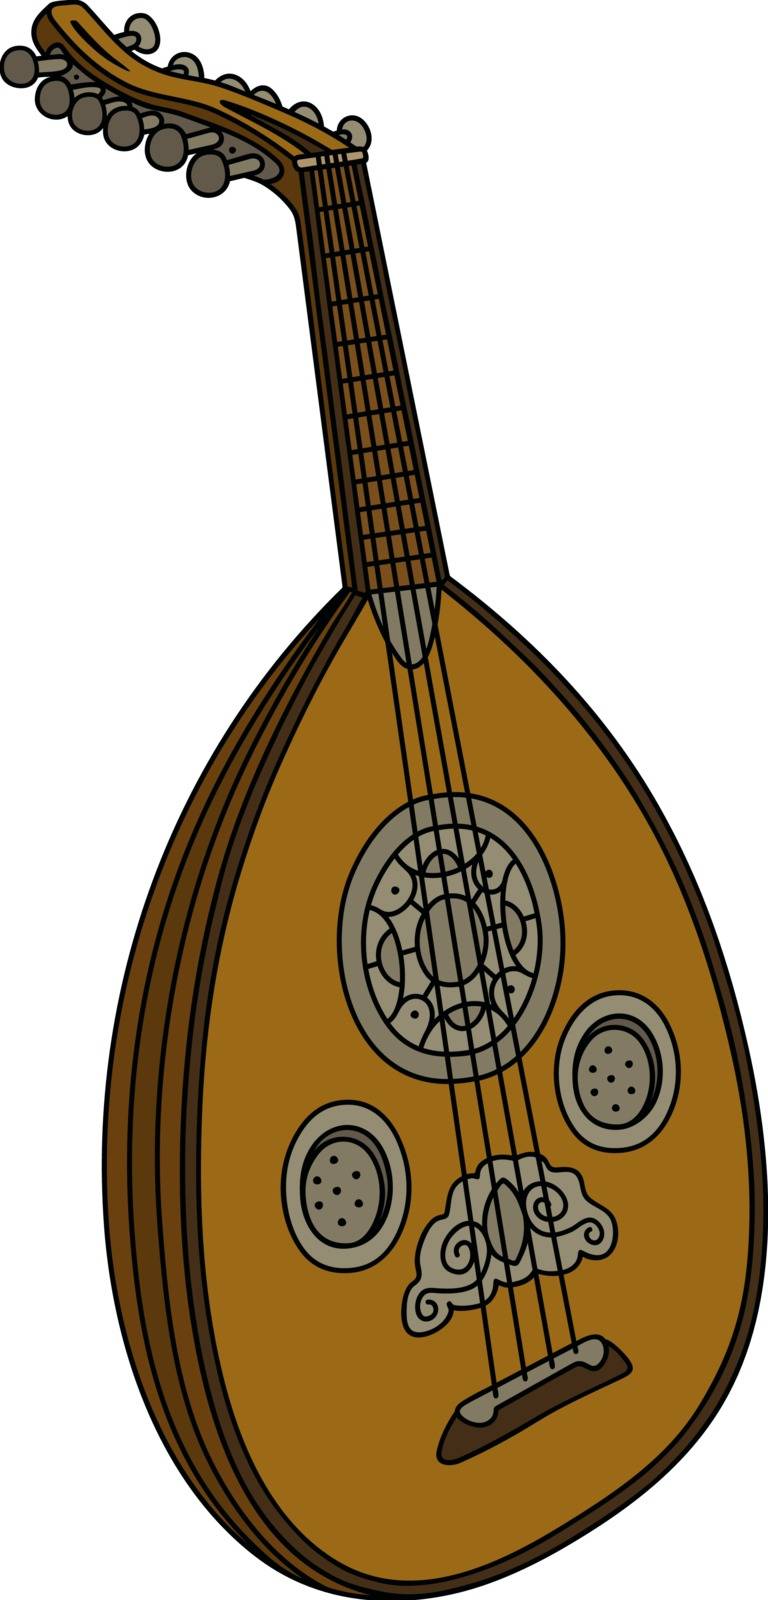 Classic wooden lute by vostal